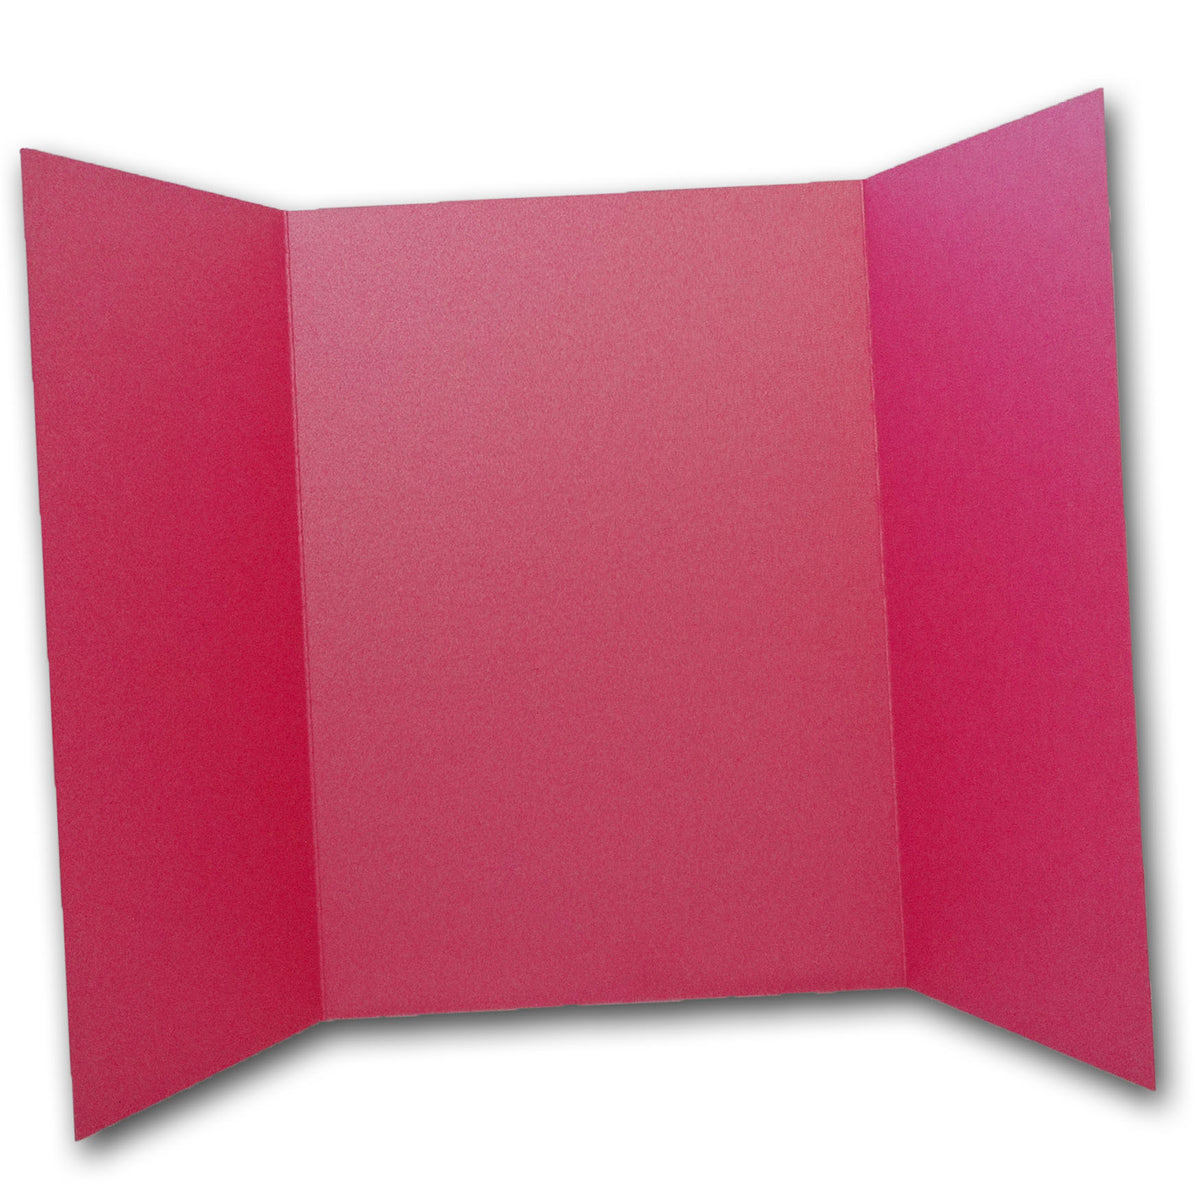 Shimmery Bright Pink 5x7 Gatefold Discount Card Stock DIY Invitations